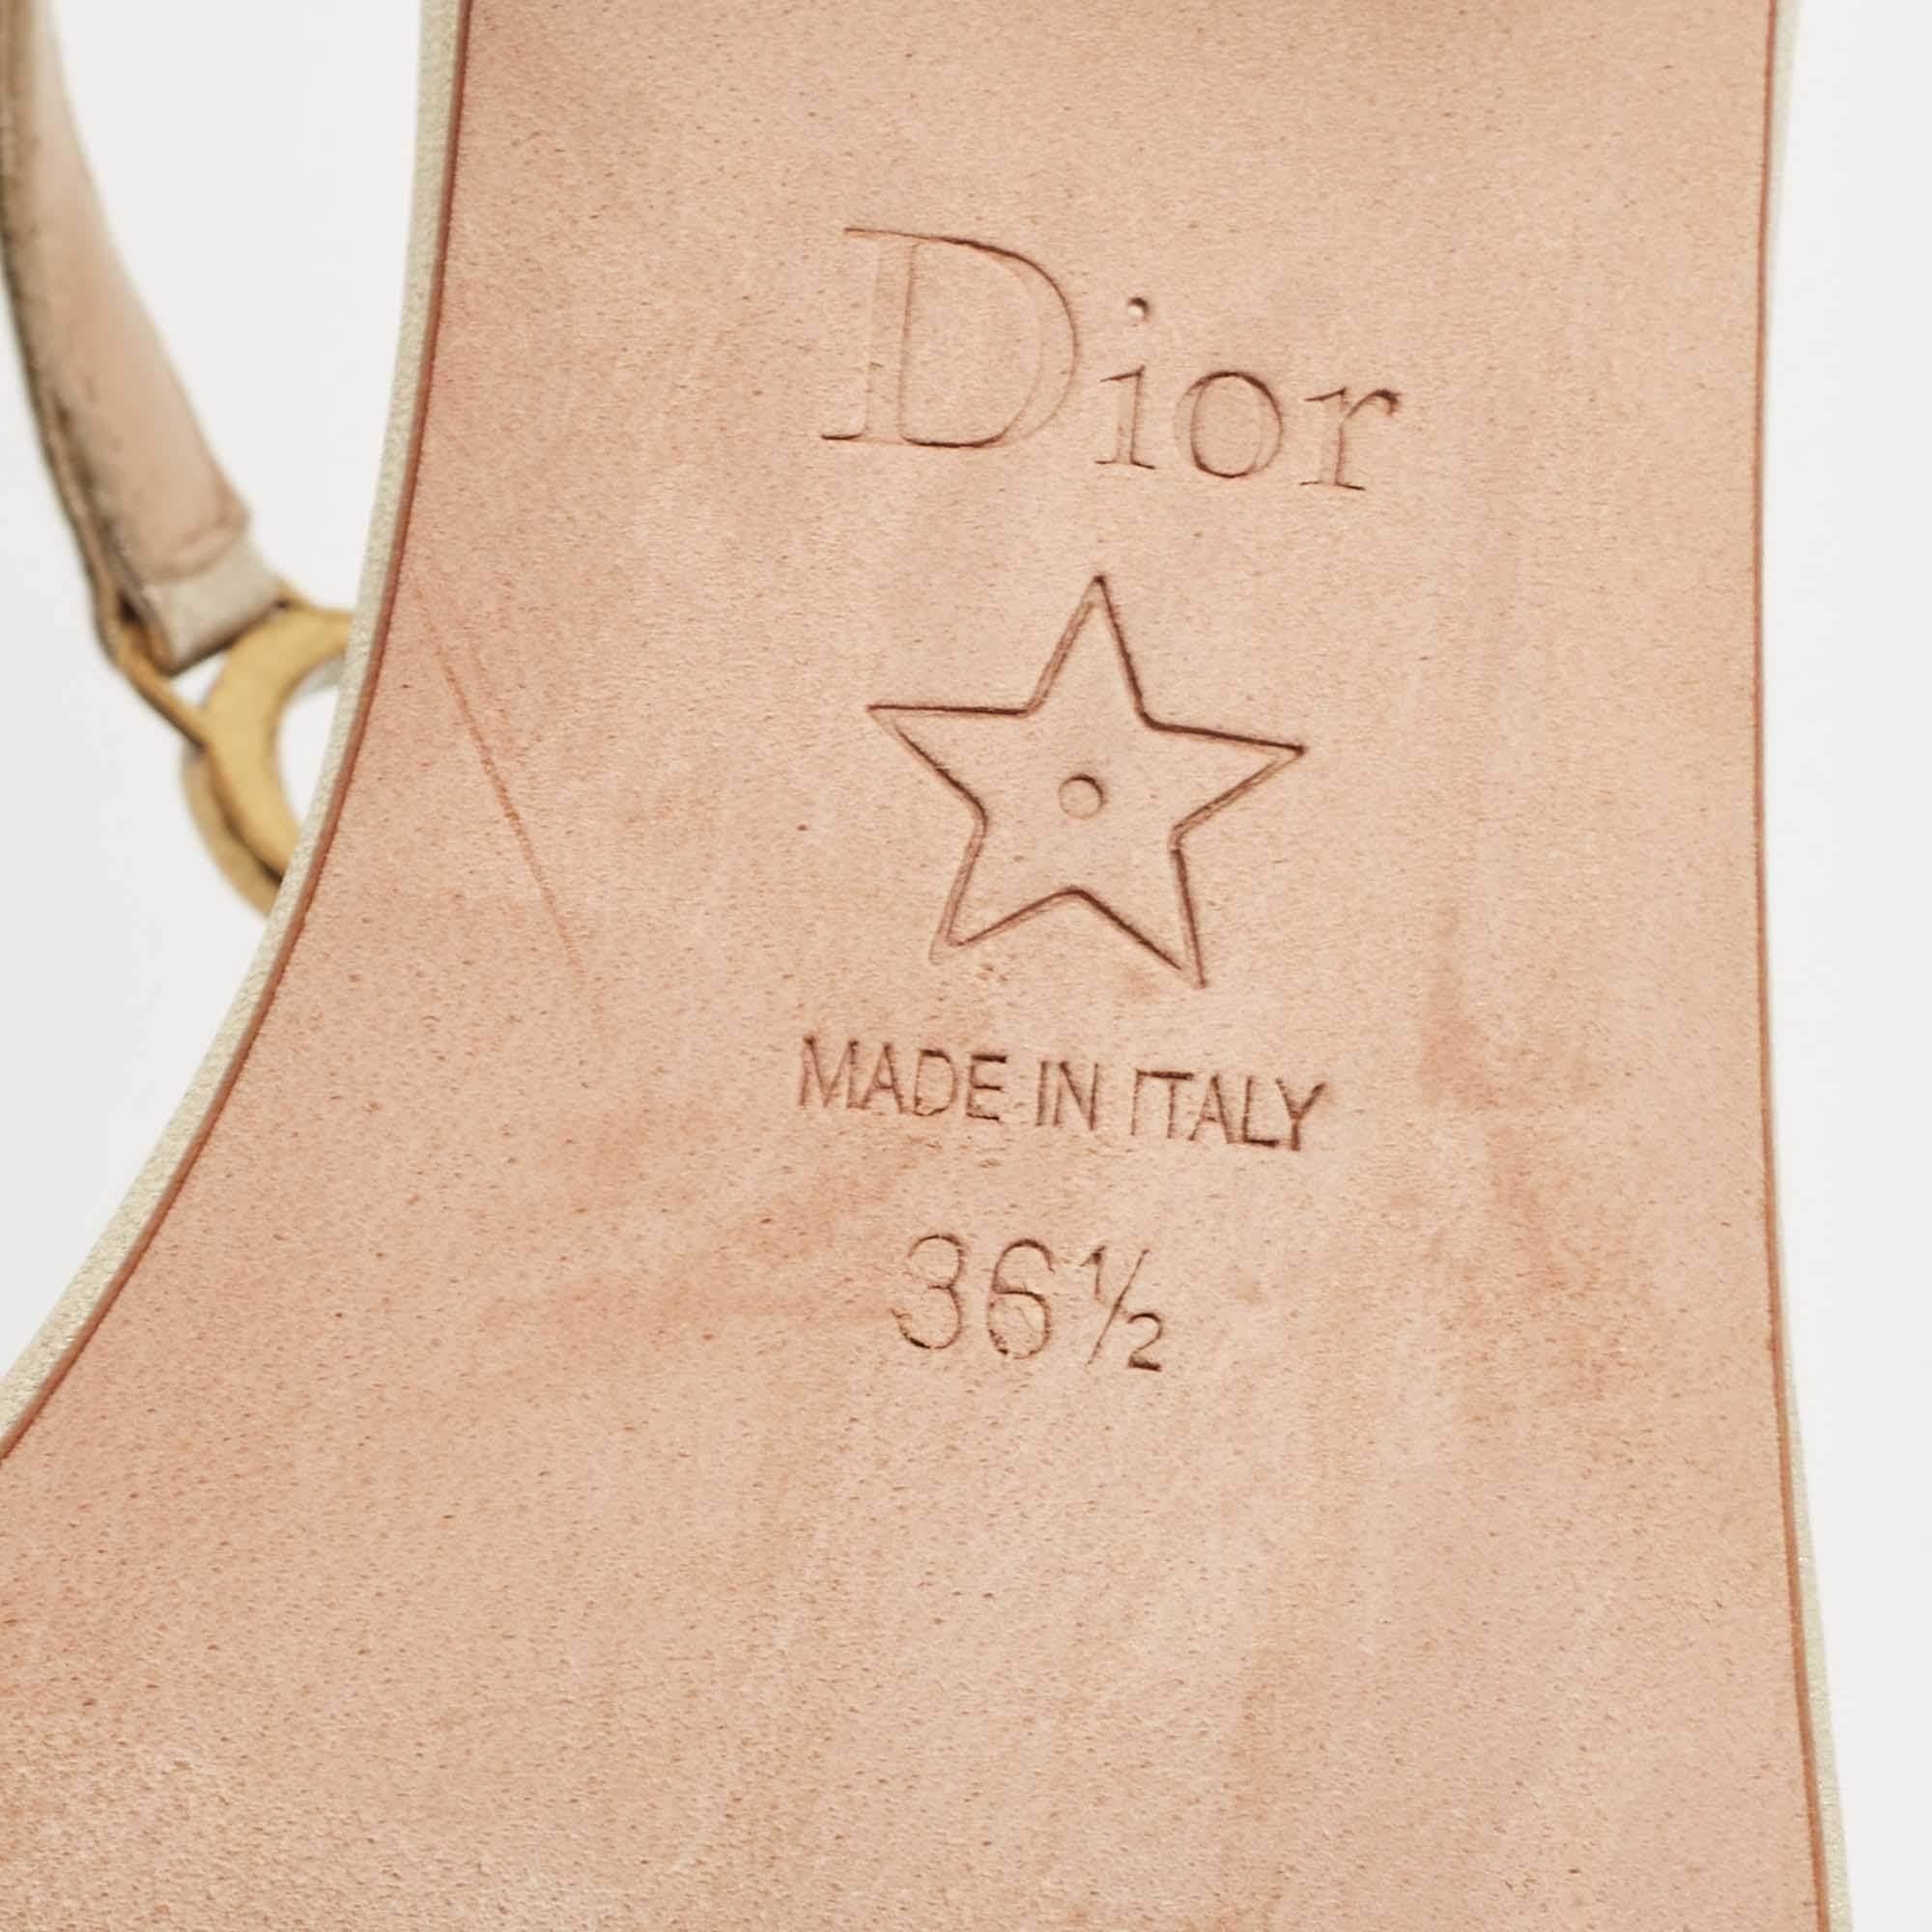 Dior Metallic Gold Leather T Strap Sandals Size 36.5 3